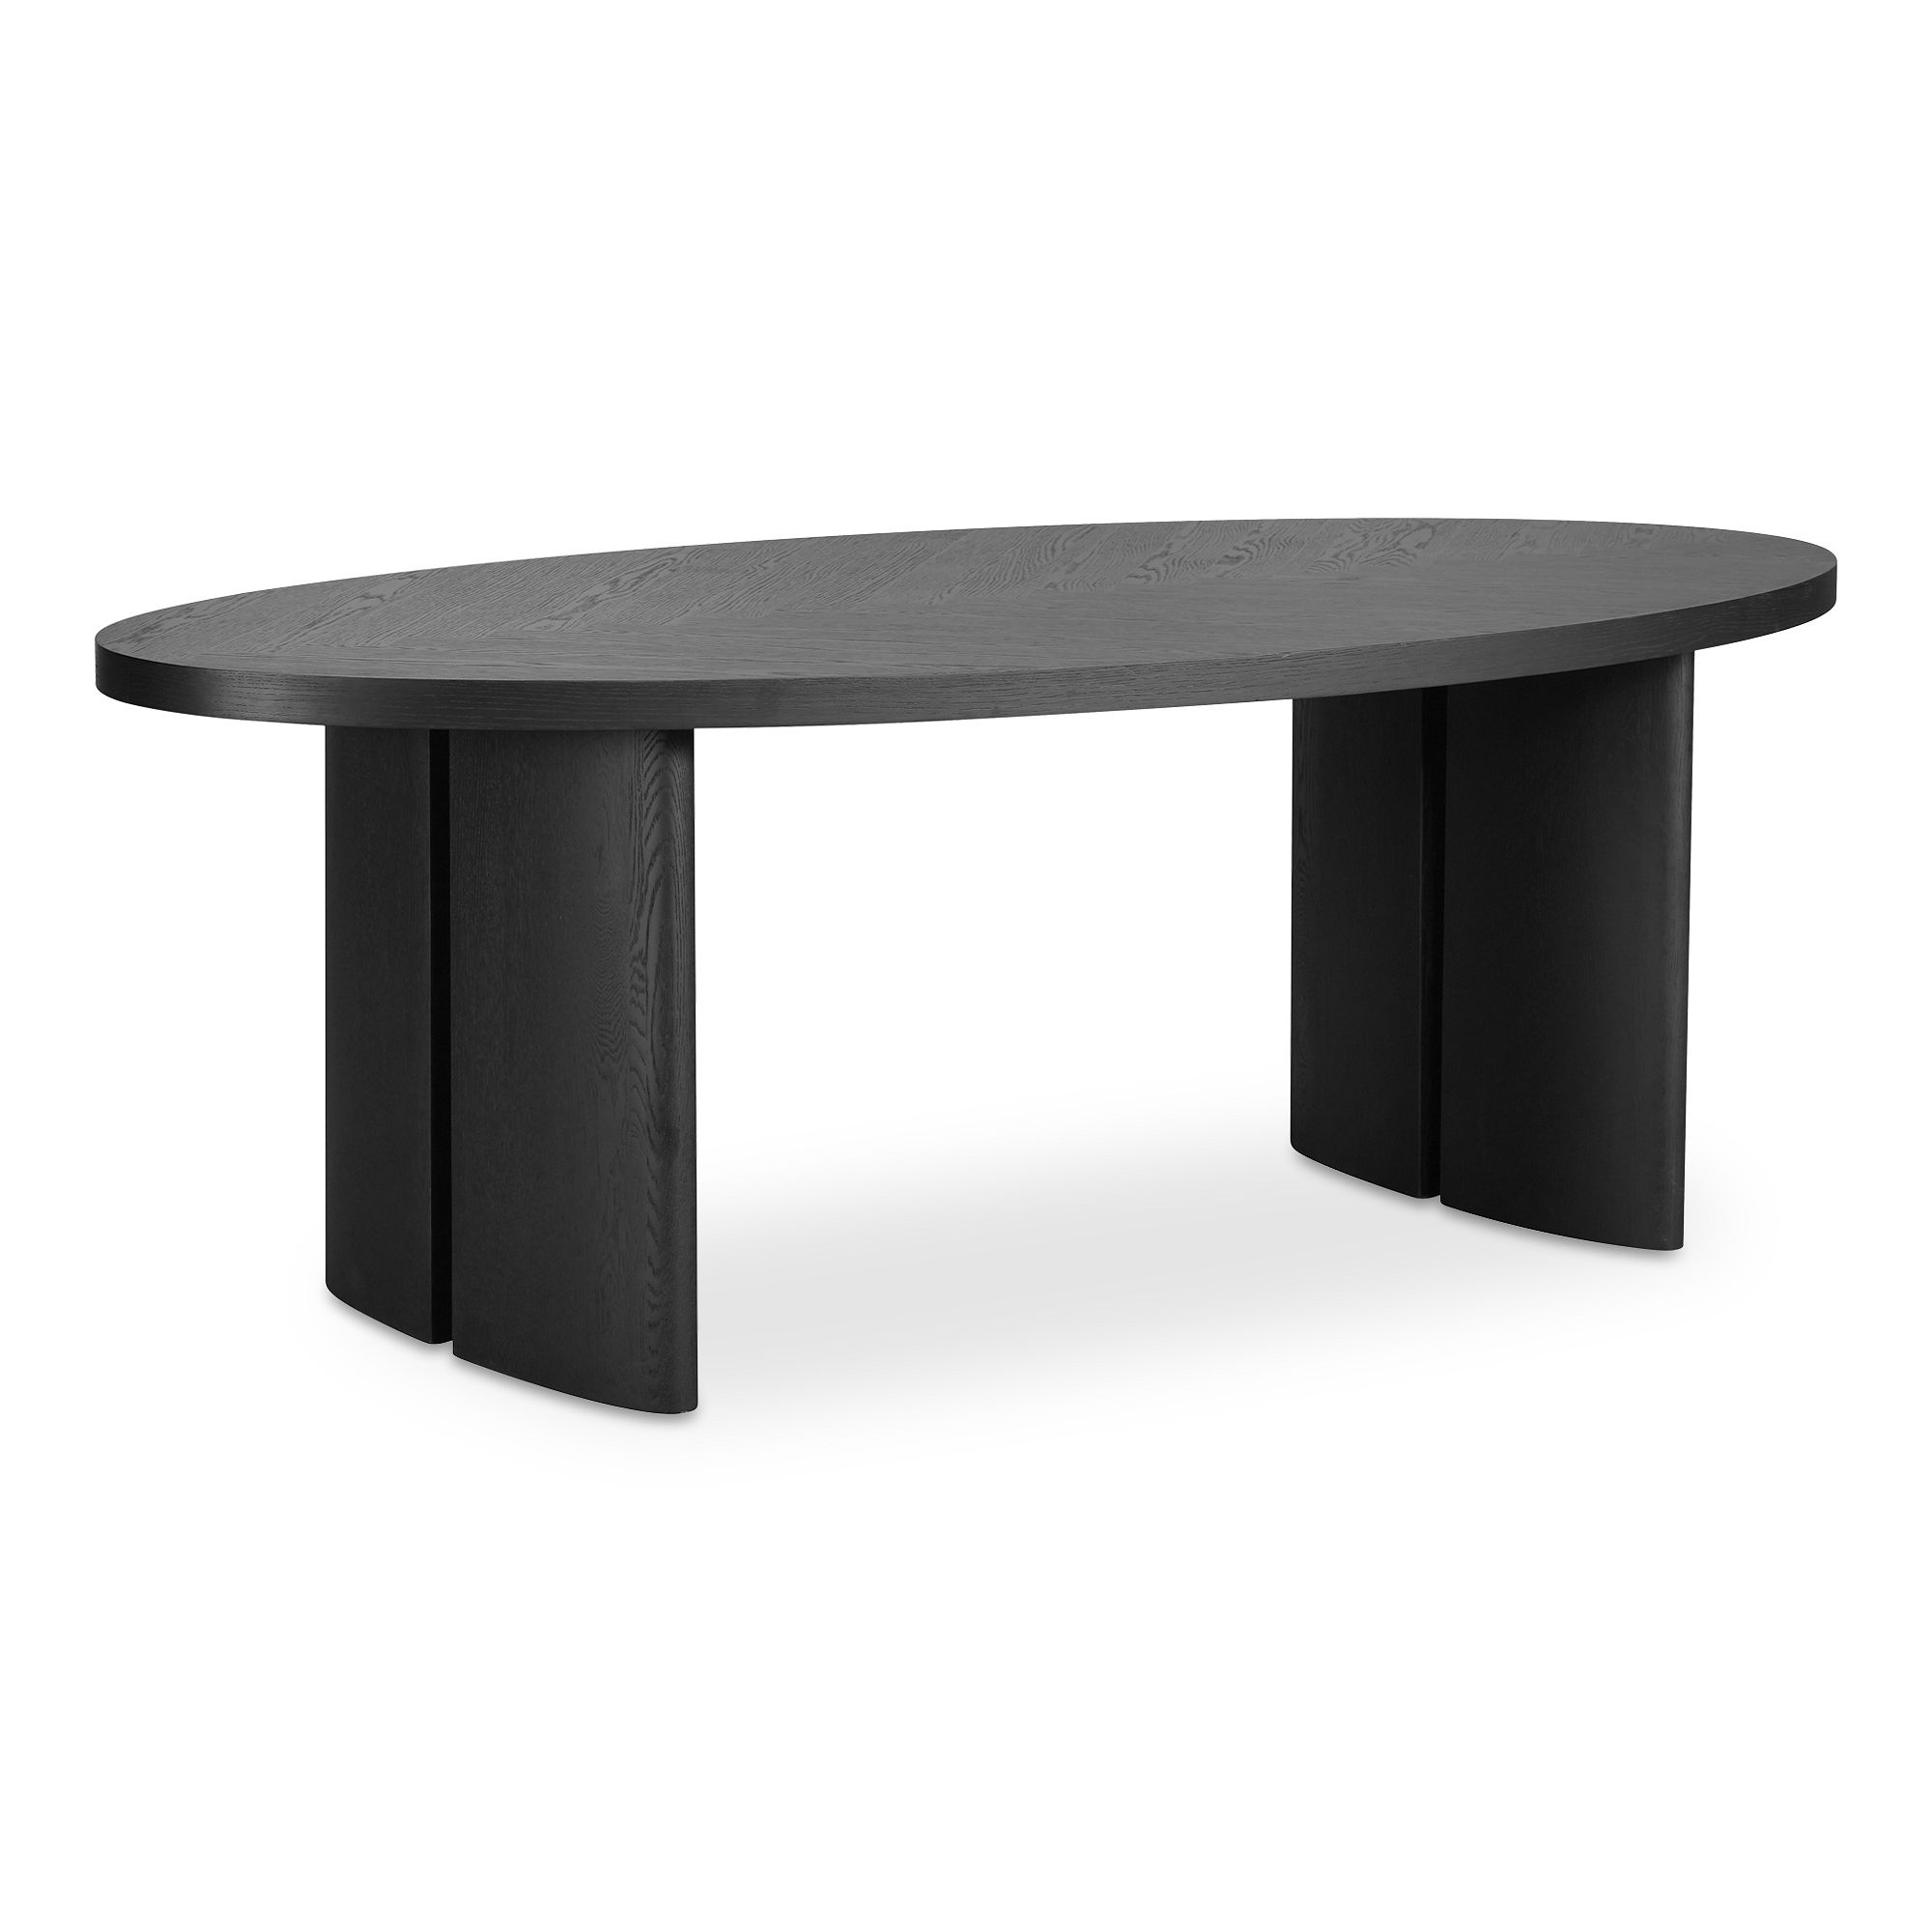 Anatola Solid Oak Oval Dining Table (86") | West Elm